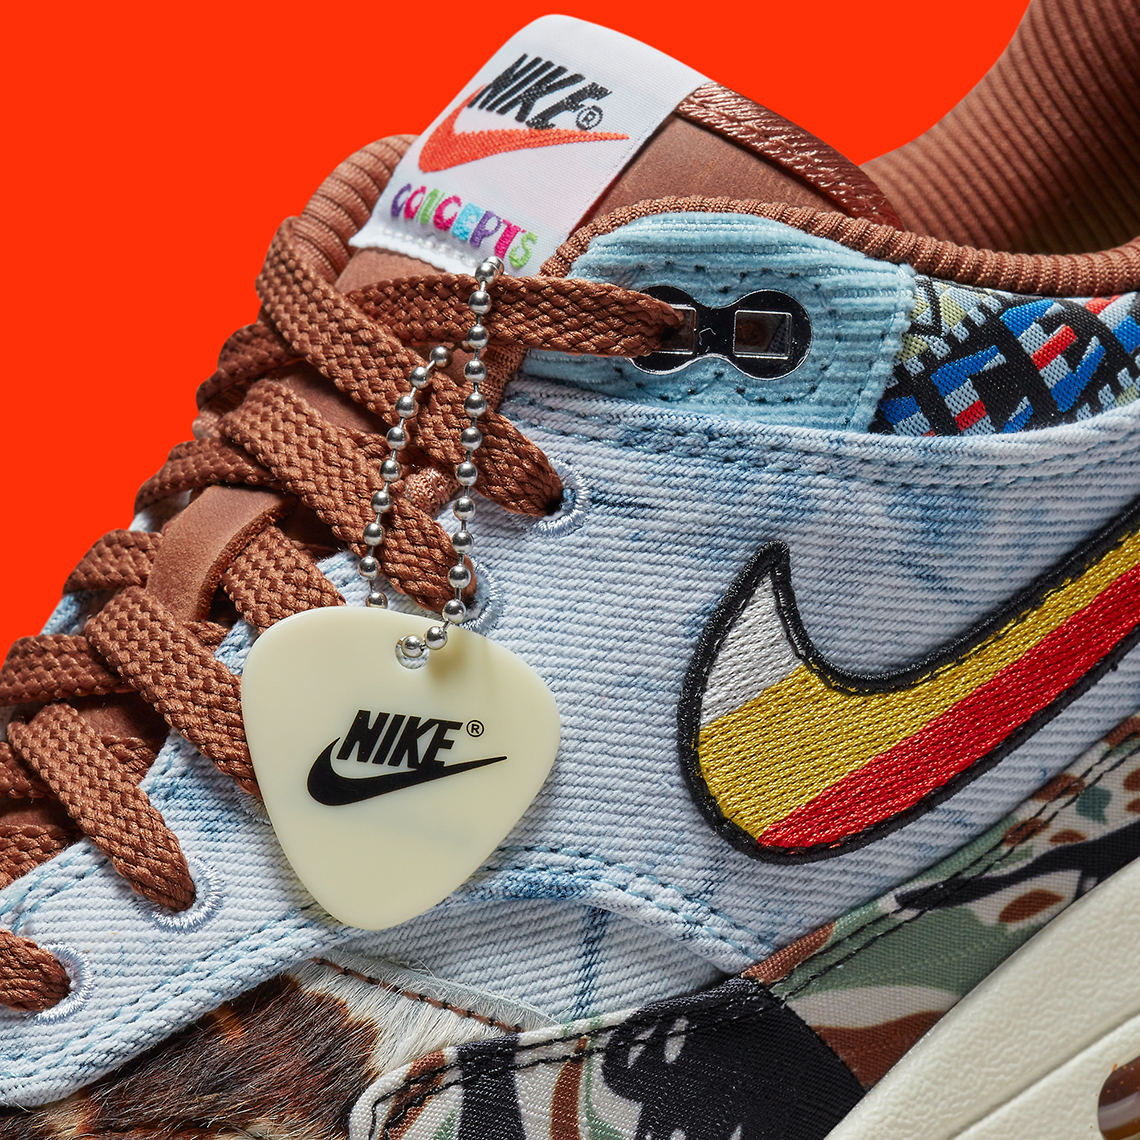 concepts nike air max 1 camo dn1803 900 release date 12